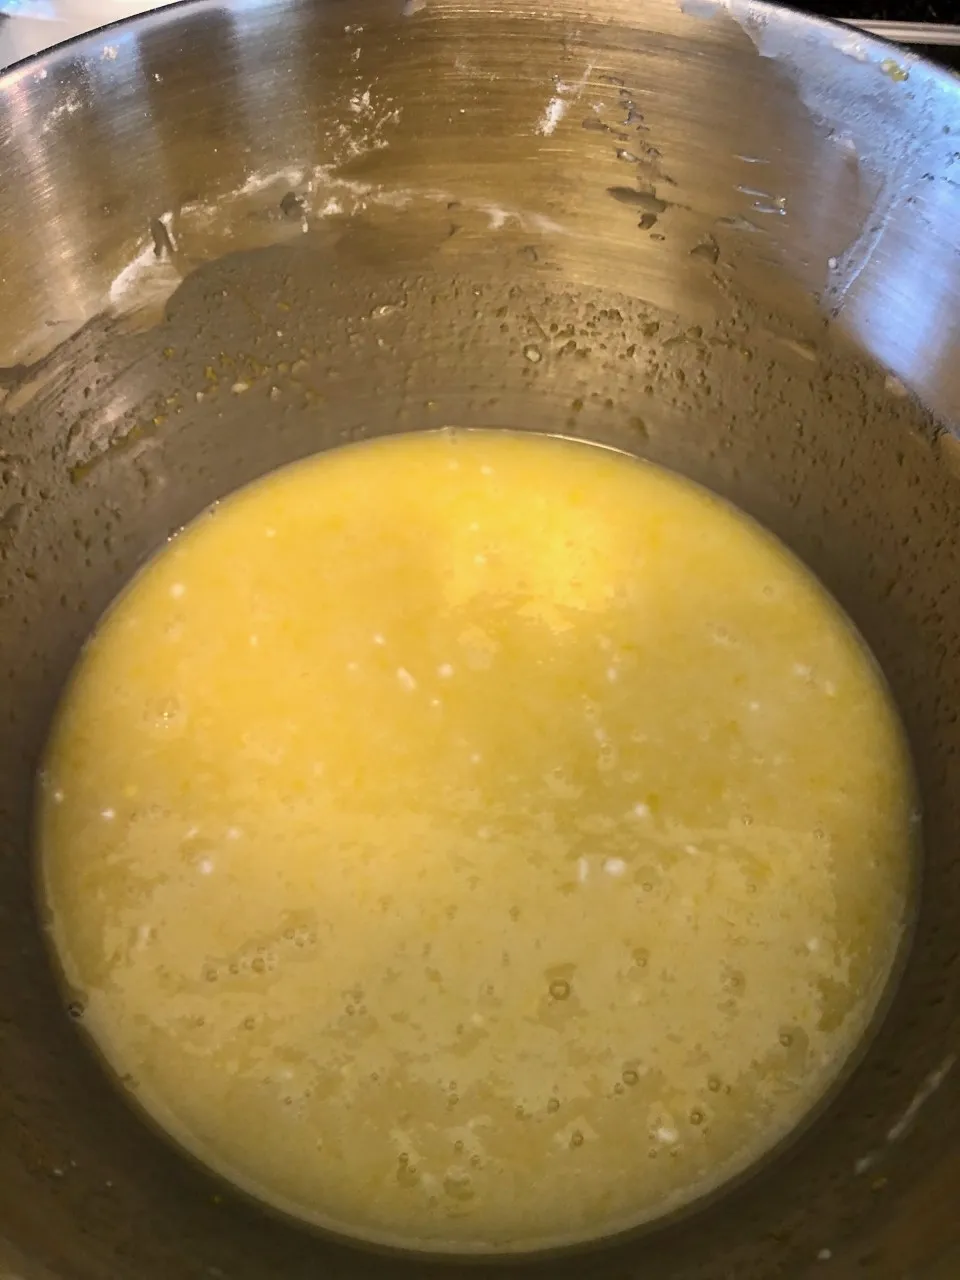 An image of the filling mixture for the lemon bars in a mixing bowl